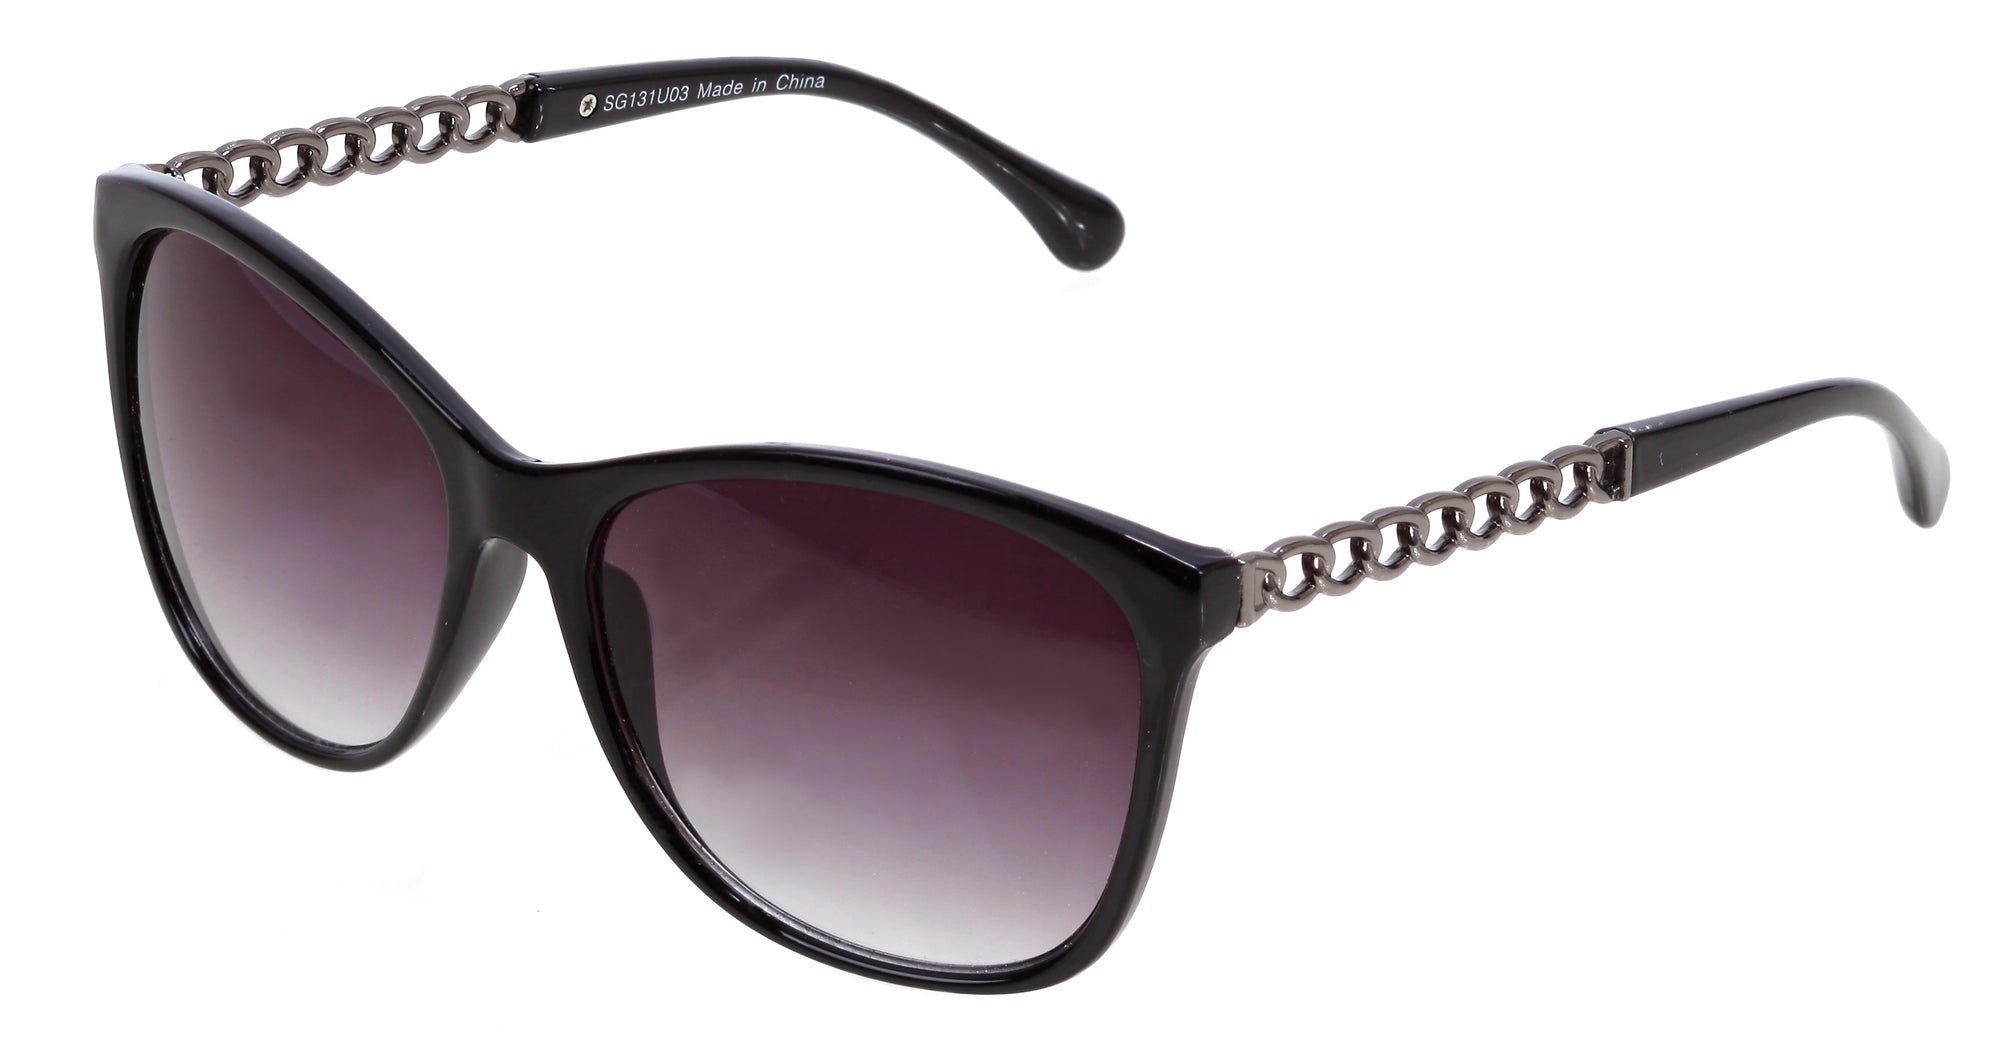 Black sunglasses with chains